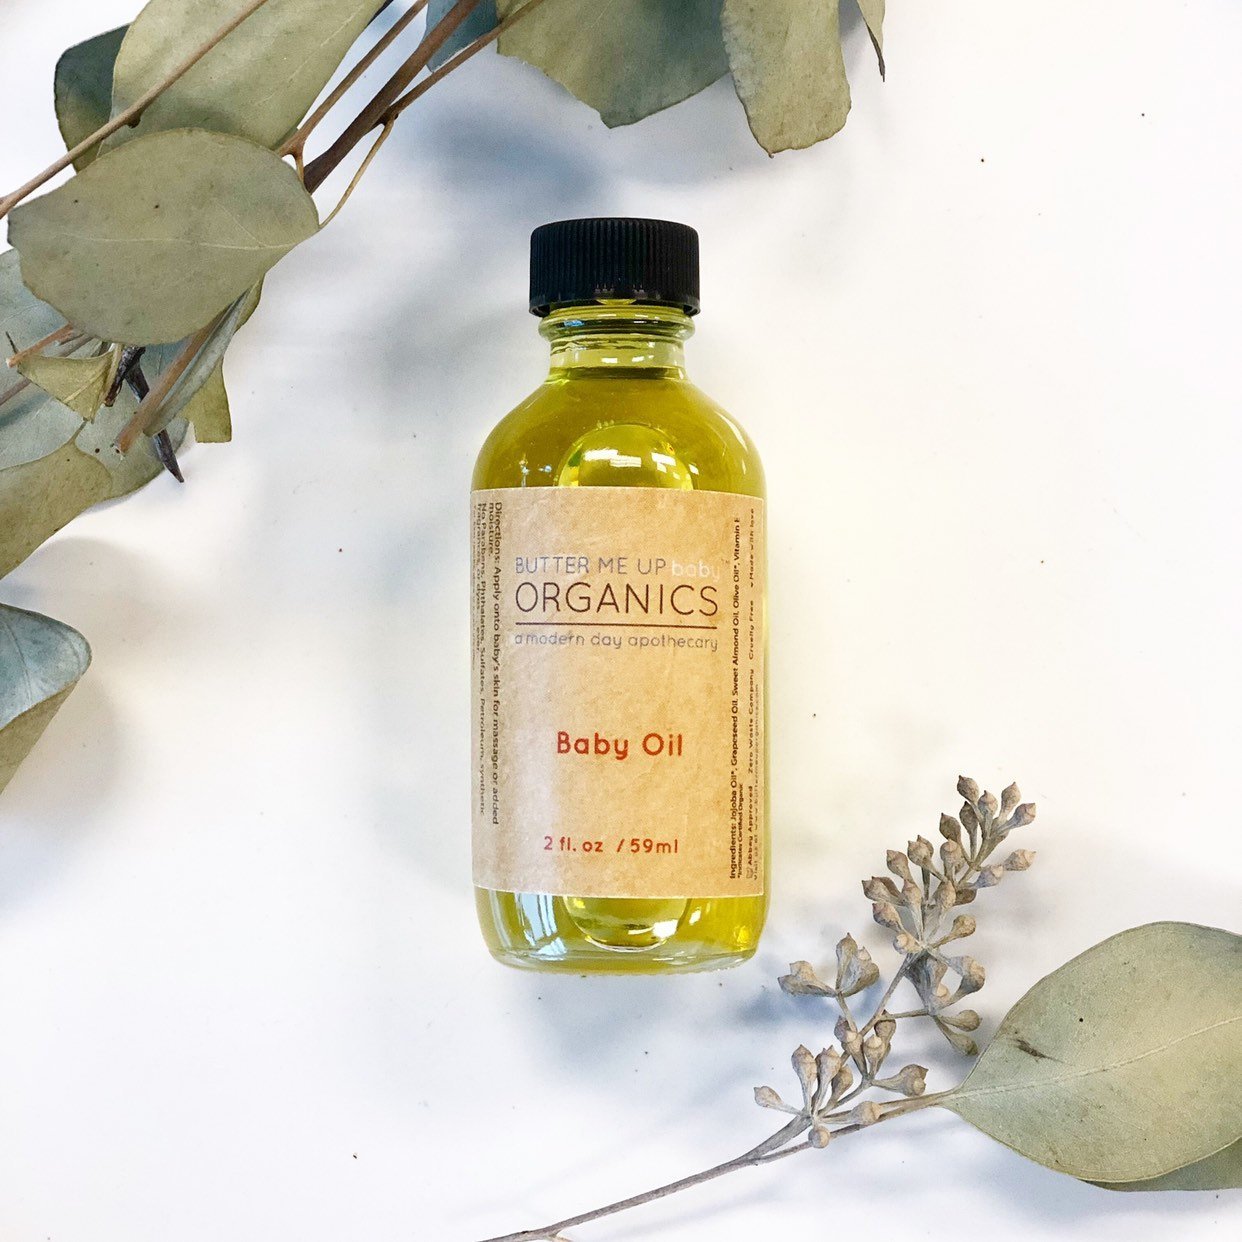 Organic Gentle Baby Oil - Roses & Chains | Fashionable Clothing, Shoes, Accessories, & More